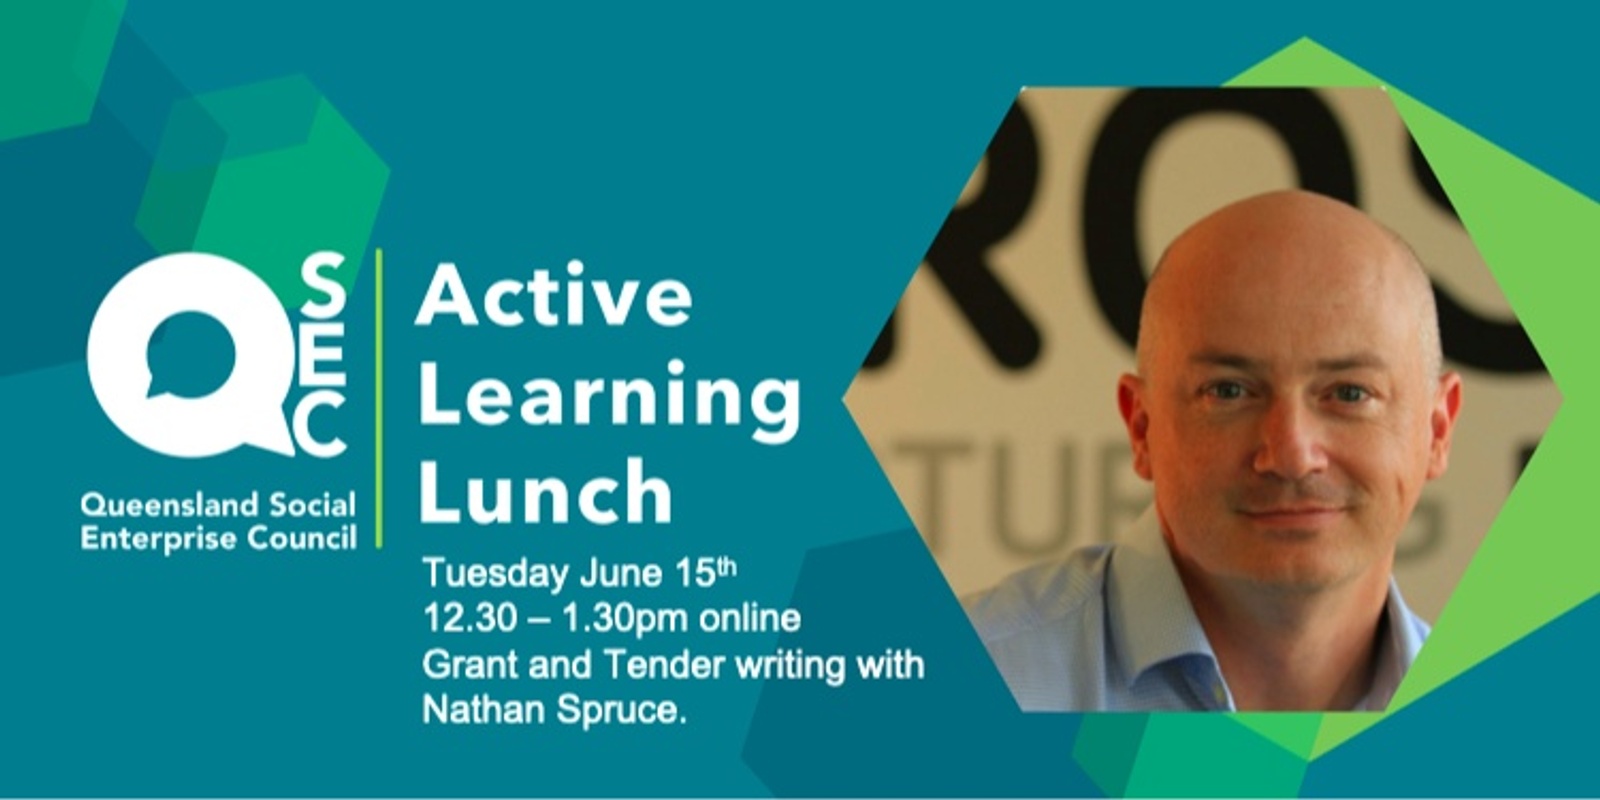 Banner image for QSEC Active Learning Lunch 1  - Grant and Tender Writing #qsocent